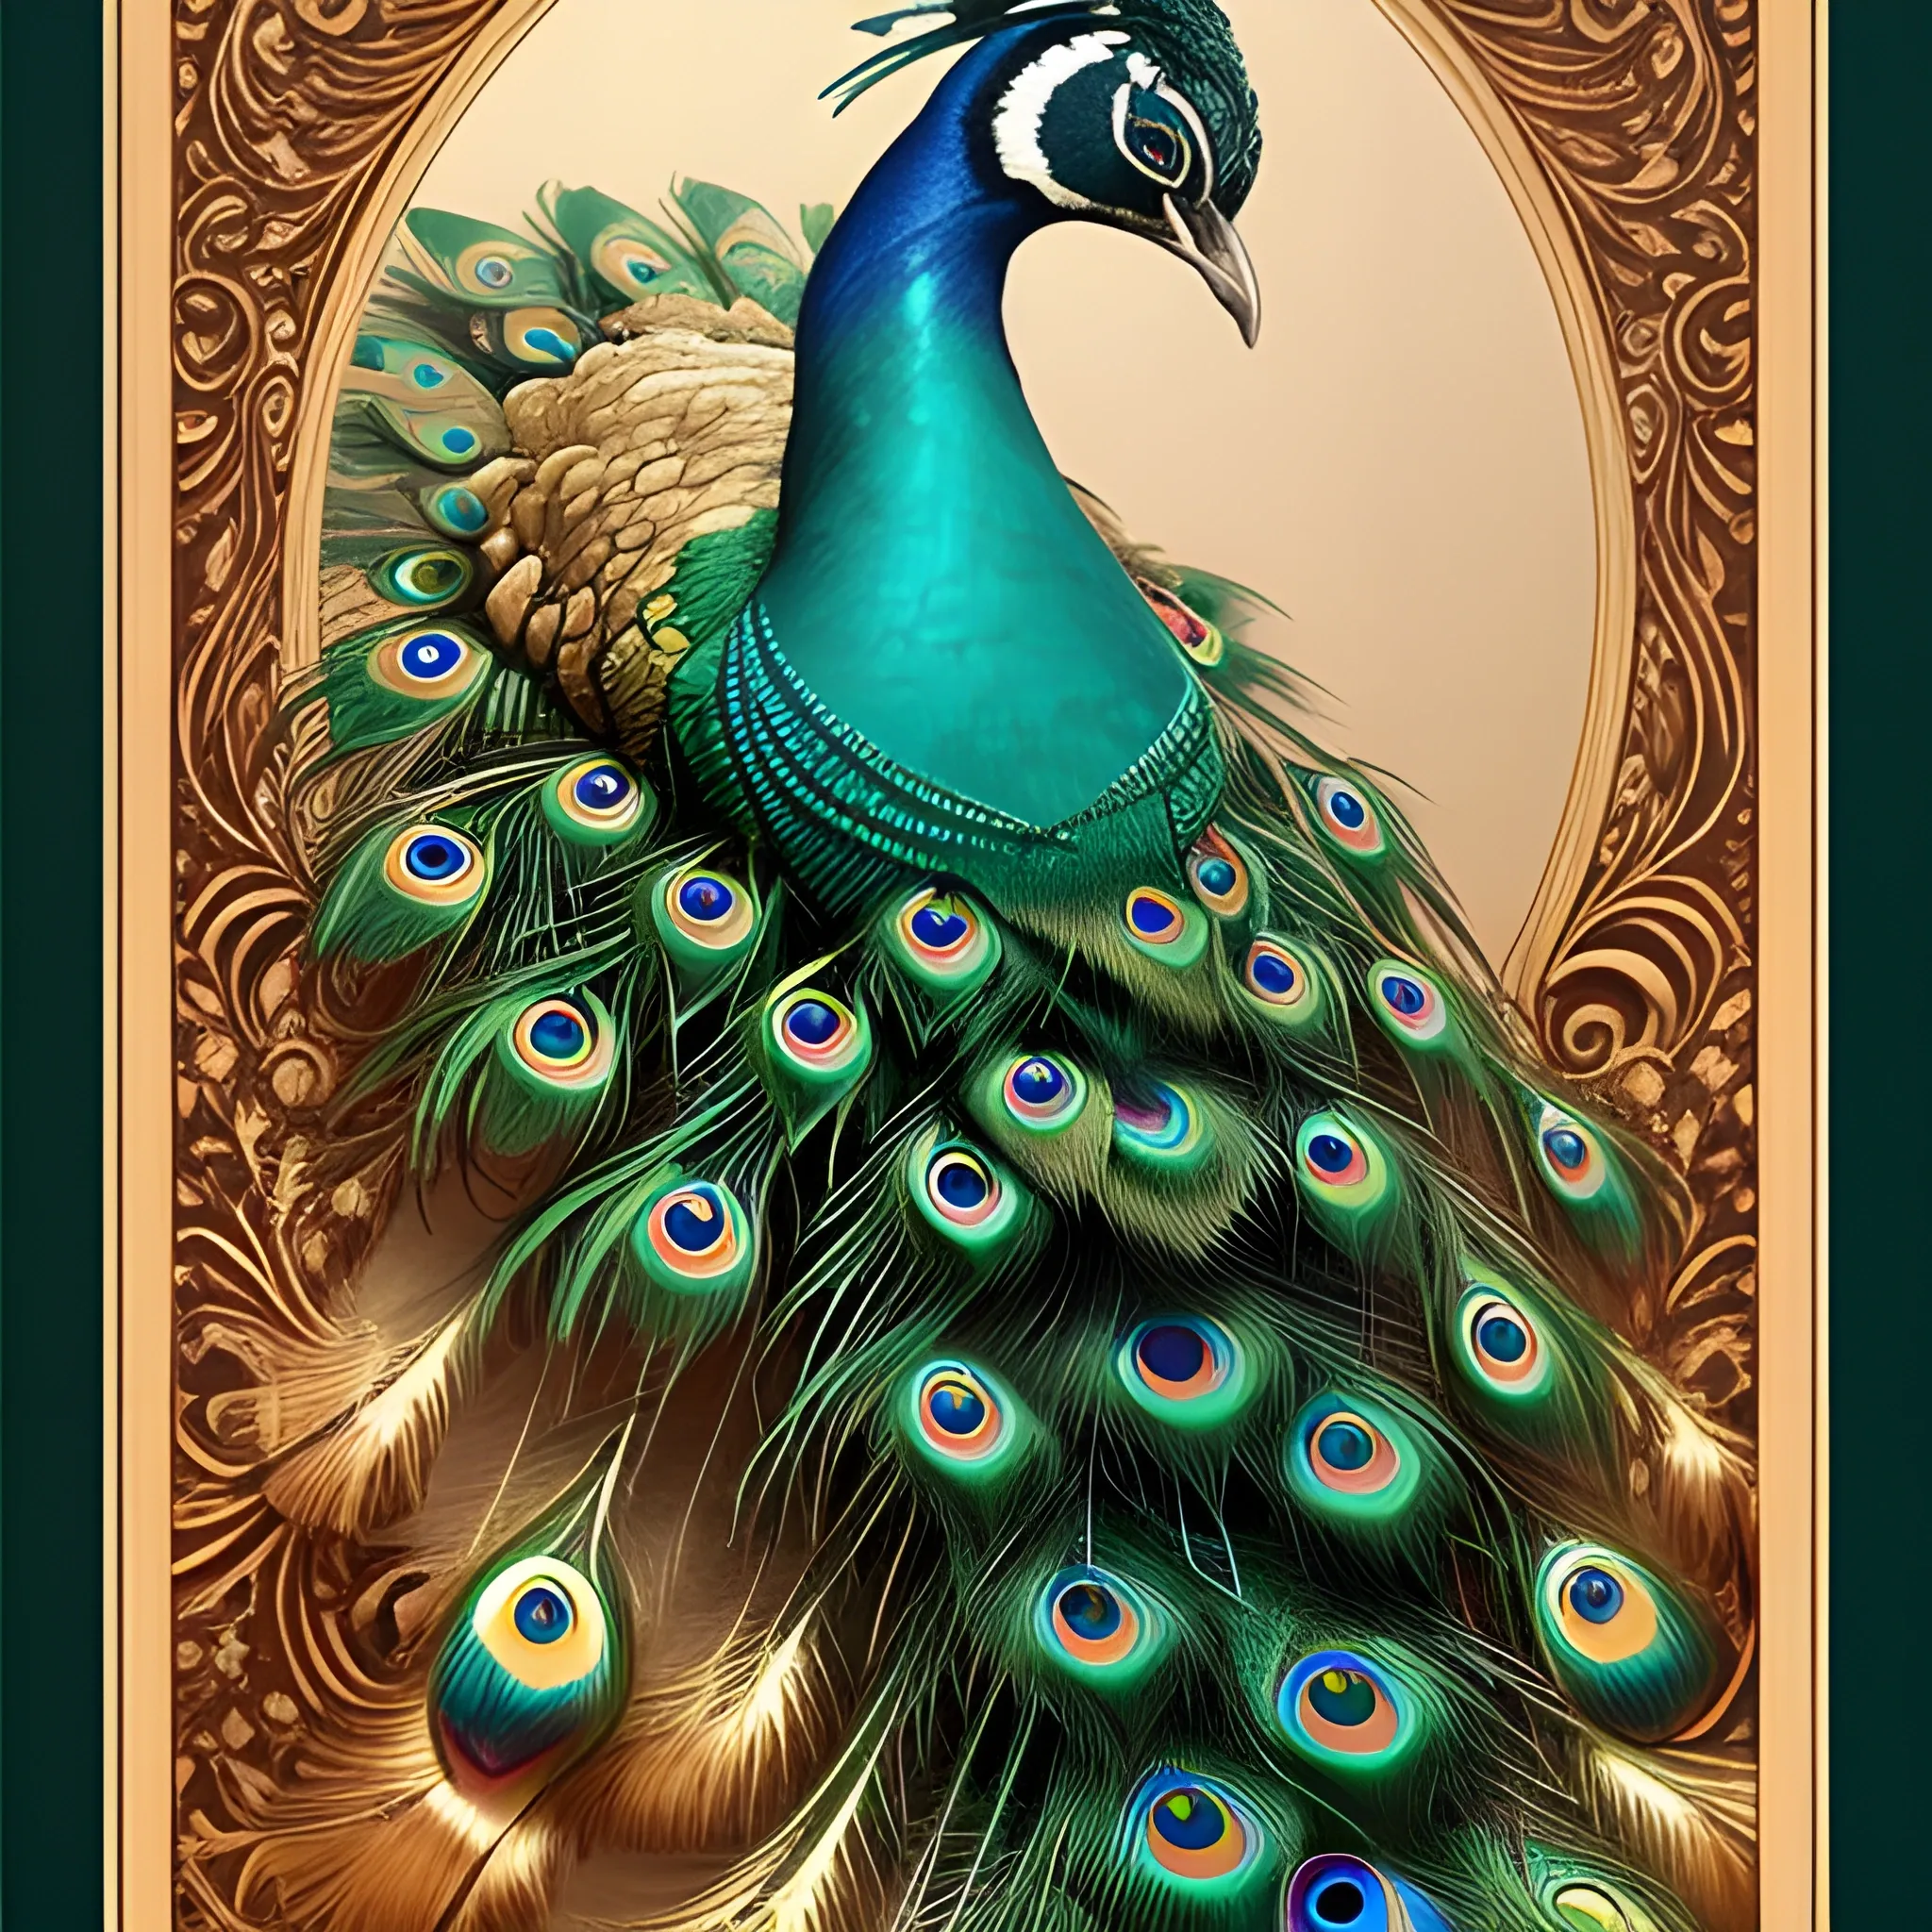 Exquisite portrayal of a majestic peacock in its full splendor, showcasing its resplendent plumage, intricate feather details, vibrant colors, graceful poise, and a captivating display of its mesmerizing tail feathers.